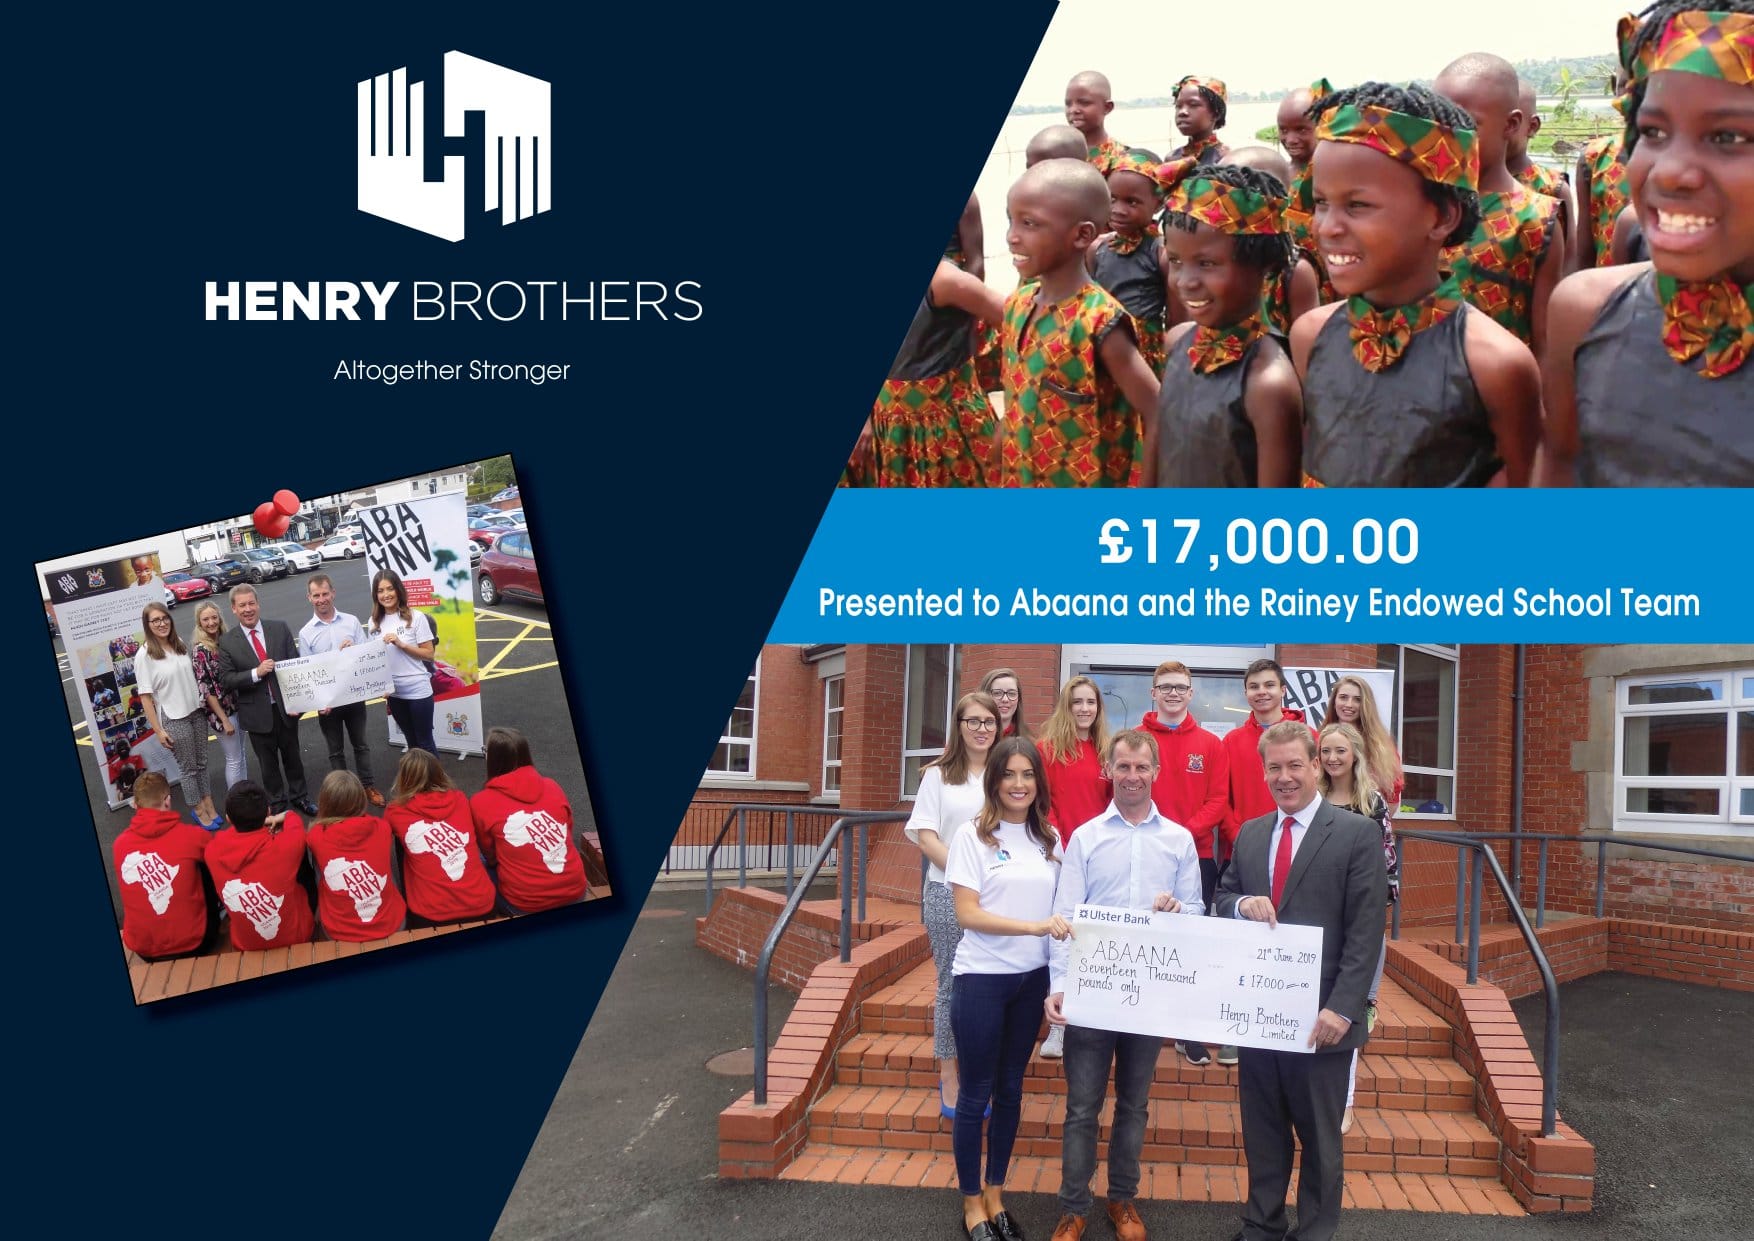 Henry Brothers team donates £17,000 to Abaana charity through The Rainey Endowed project